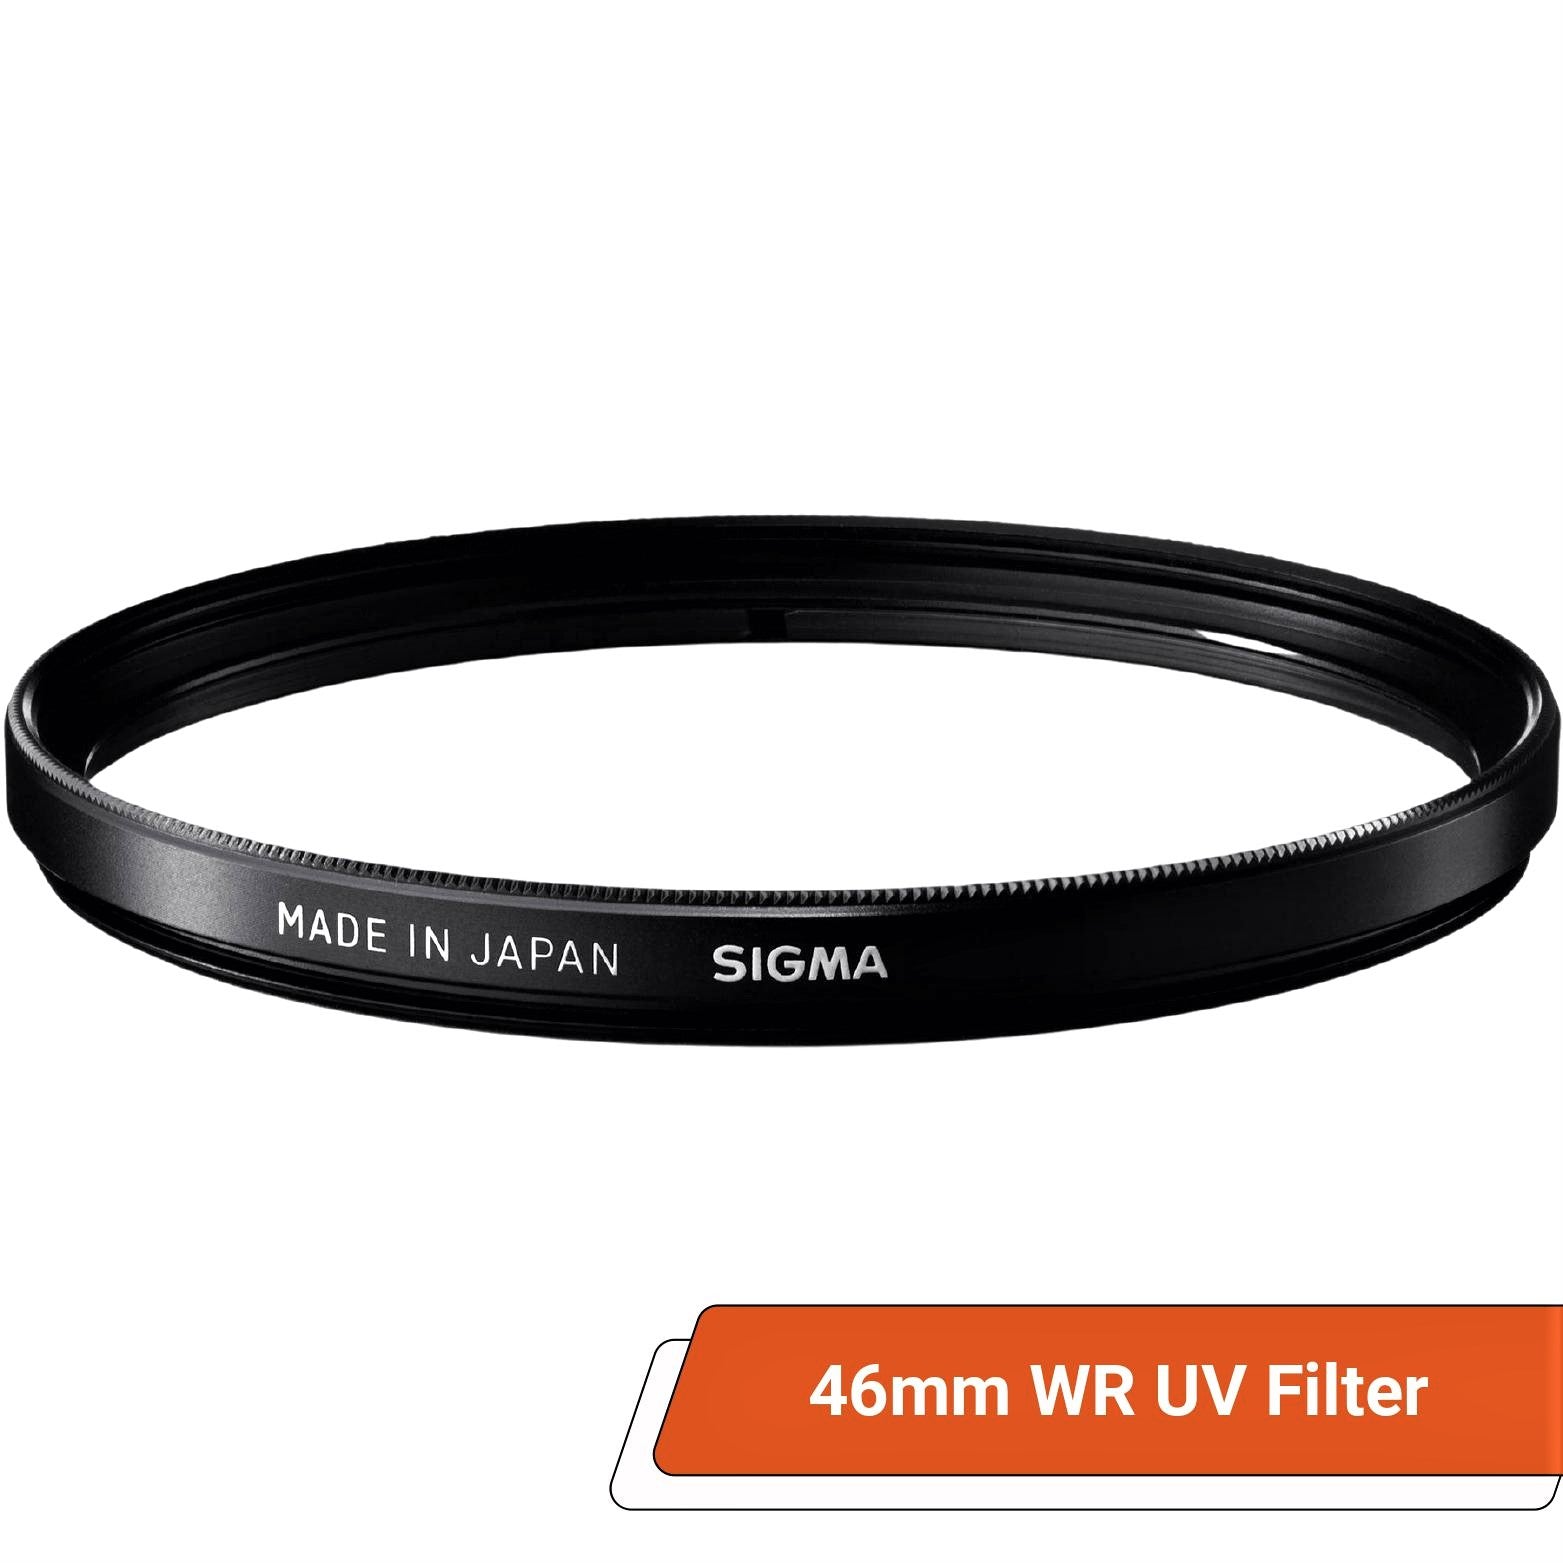 Sigma 46mm WR (Water Repellent) UV Filter